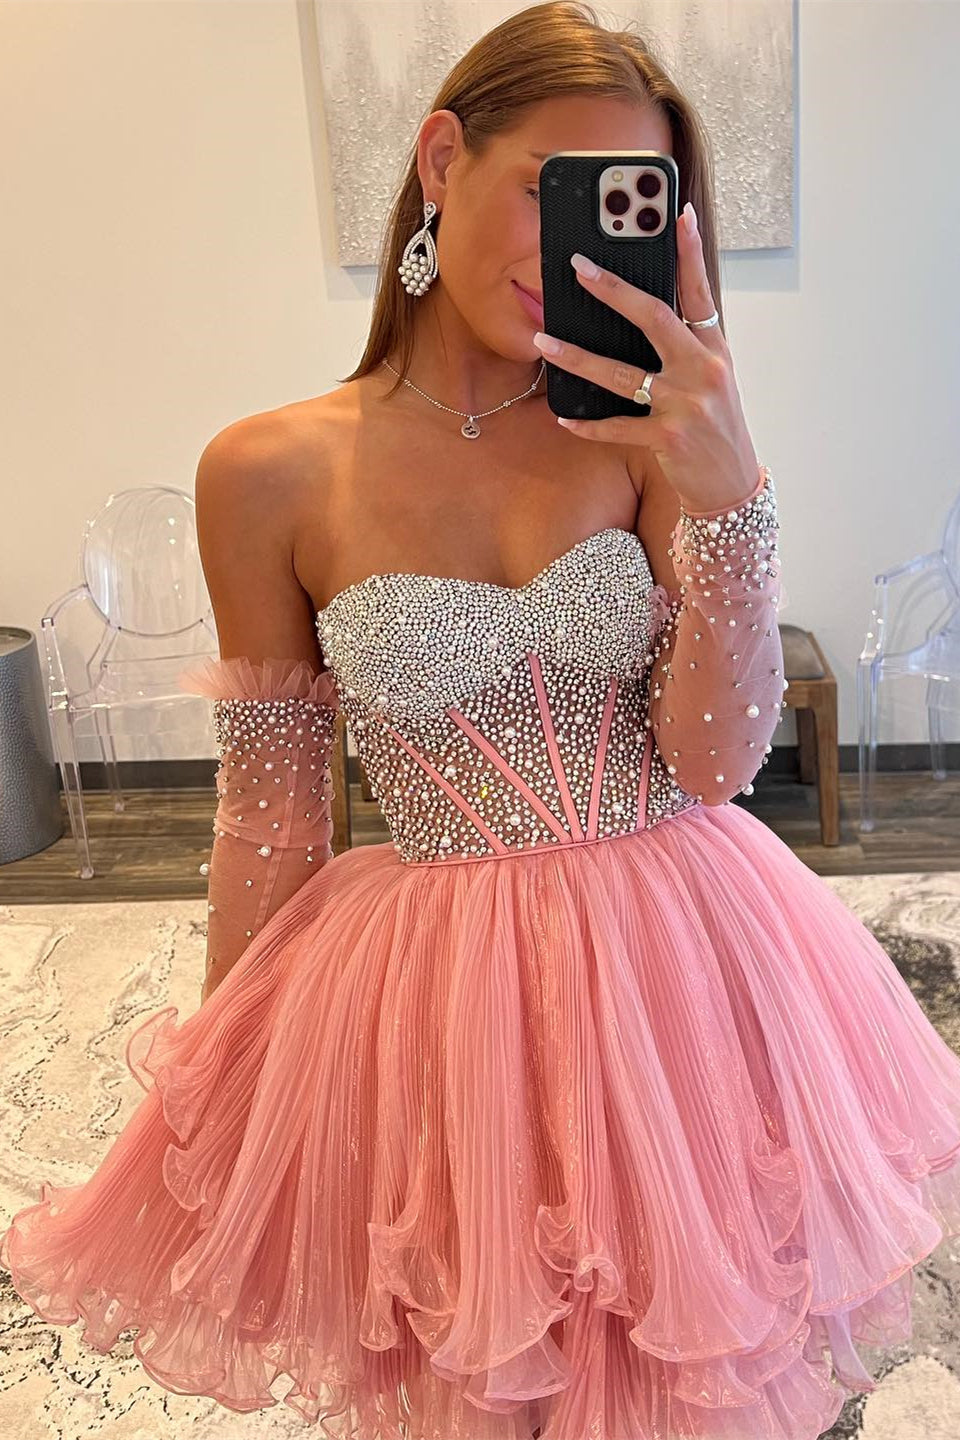 Bustier Style Beaded Black Corset + Double-Layer Pink Ruffled Skirt